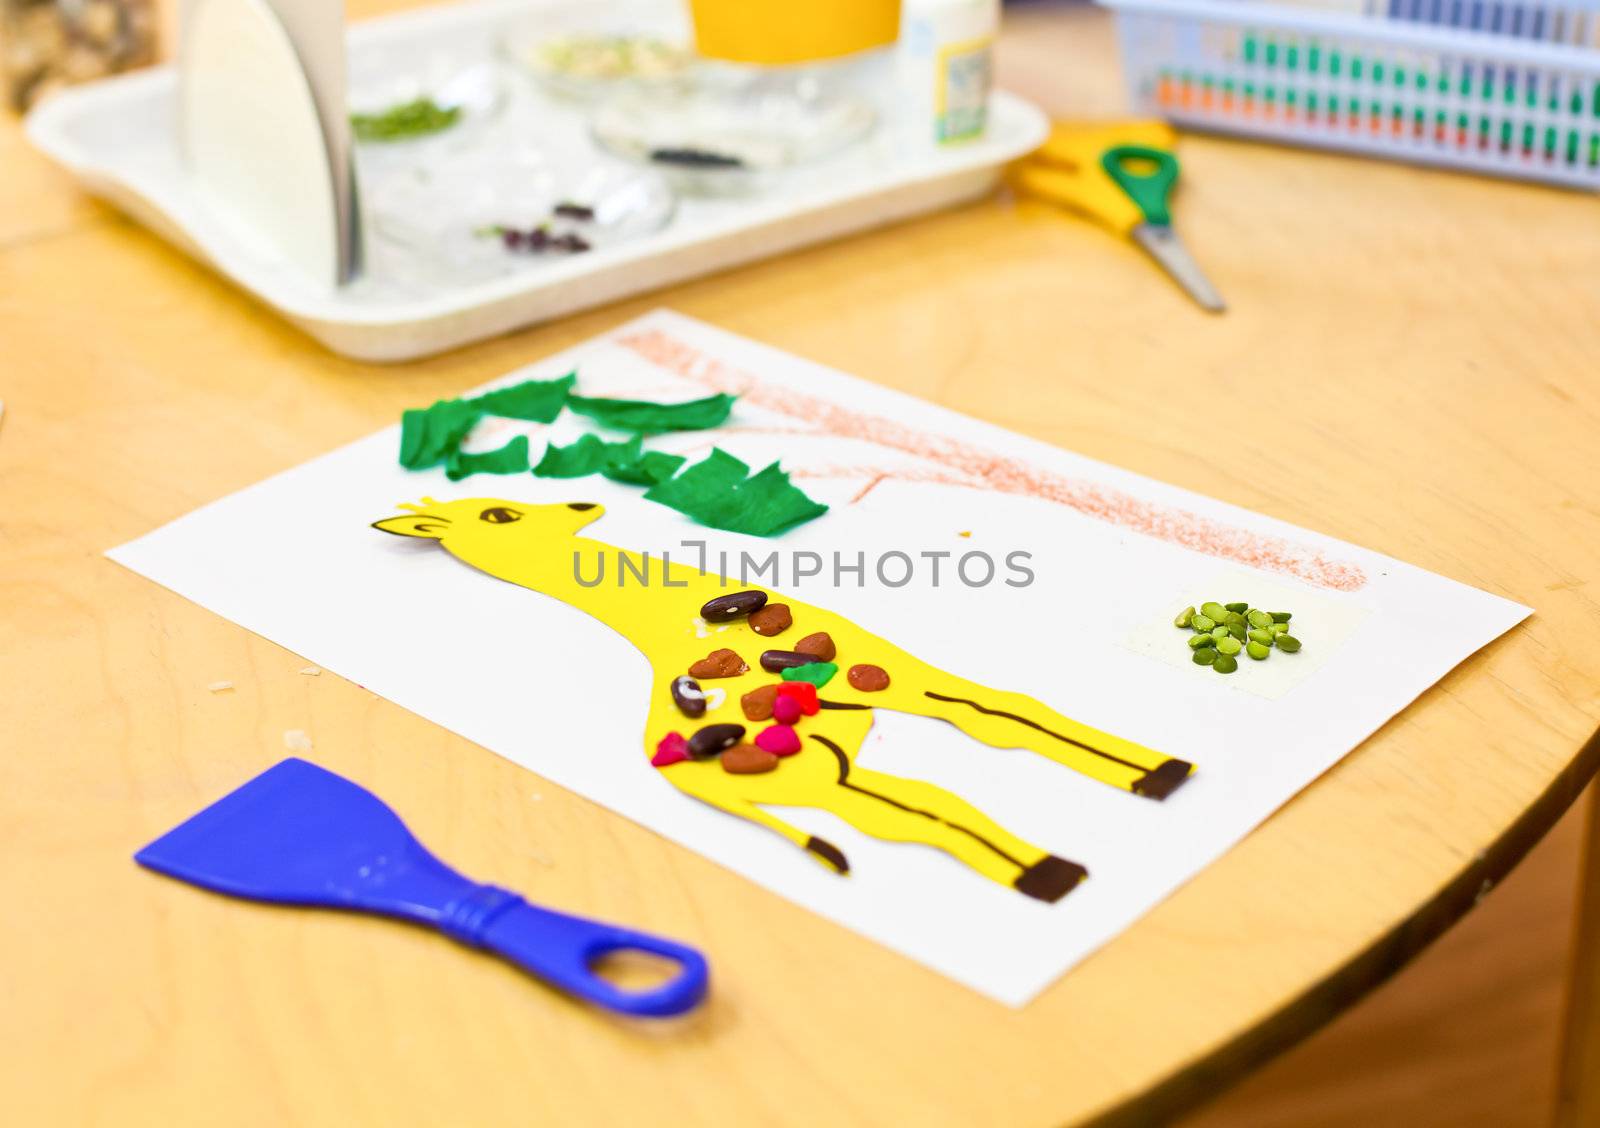 Children's applique work art items on a table